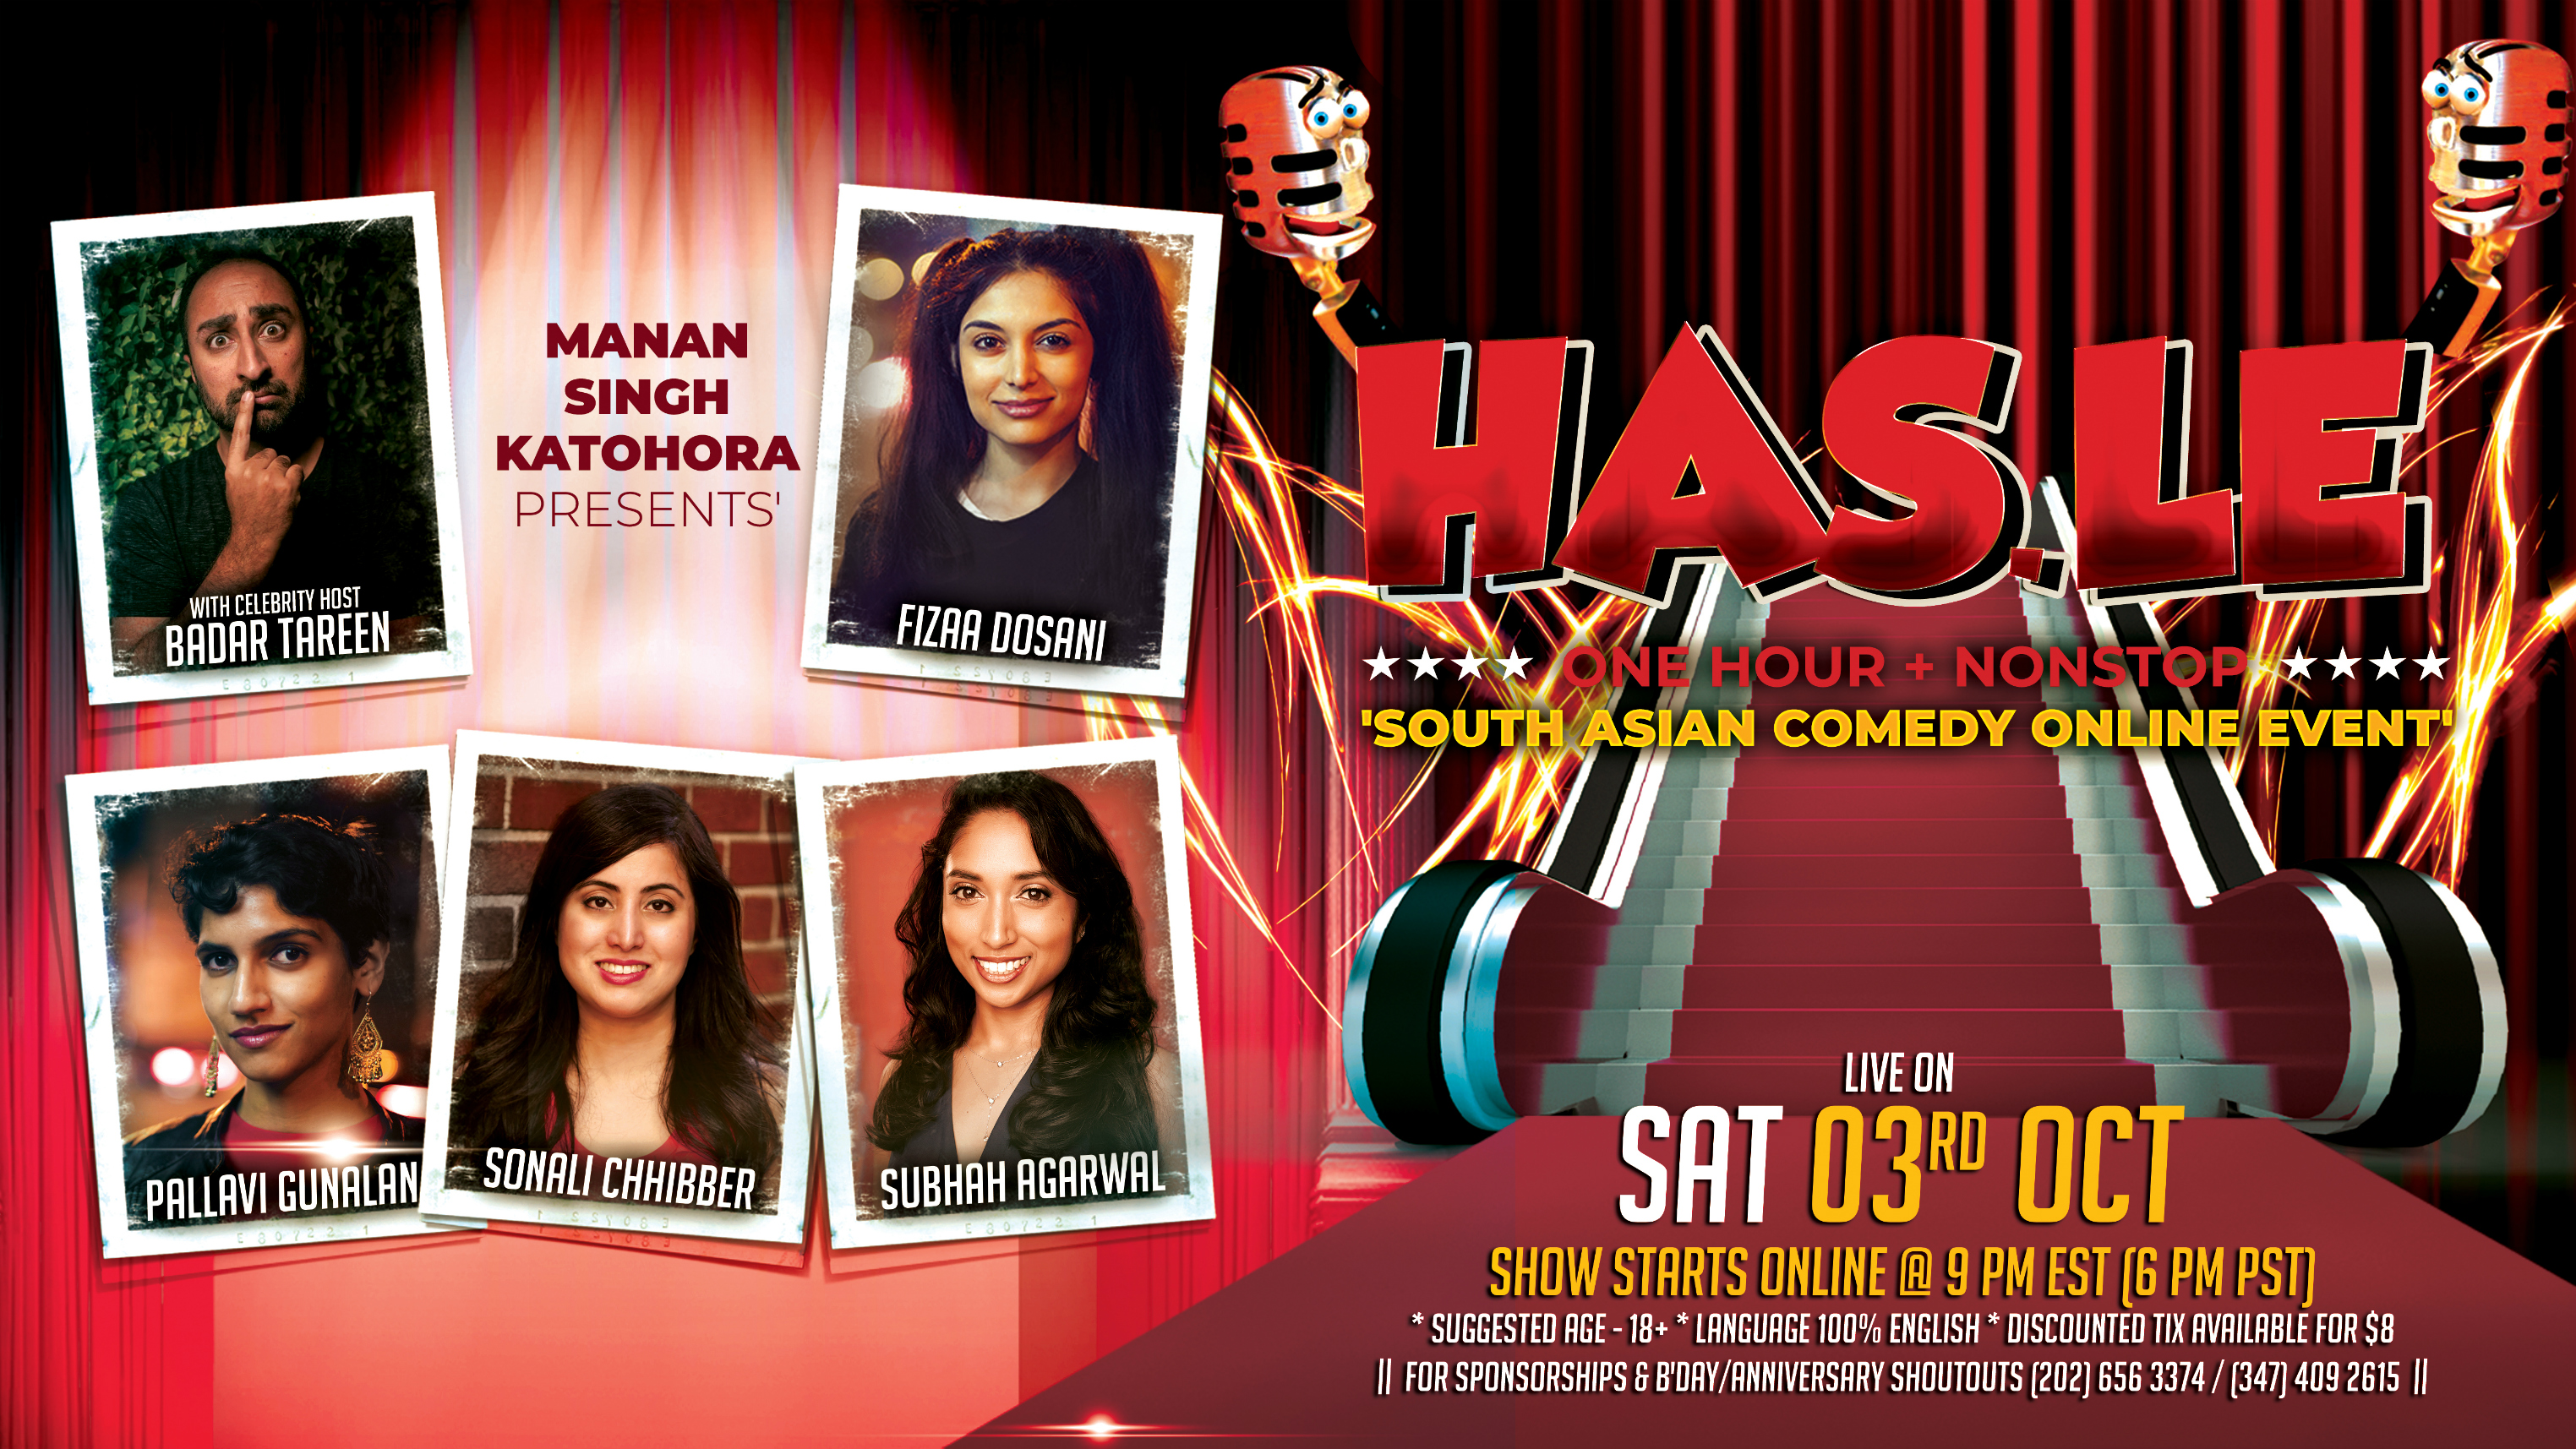 'HAS.LE' - (One Hour+ Nonstop) South Asian Comedy ONLINE Event FEATURING 5 Celebrity Comedians -- 'Fizaa Dosani, Pallavi Gunalan, Sonali Chhibber, Subhah Agarwal, and HOST Badar Tareen'